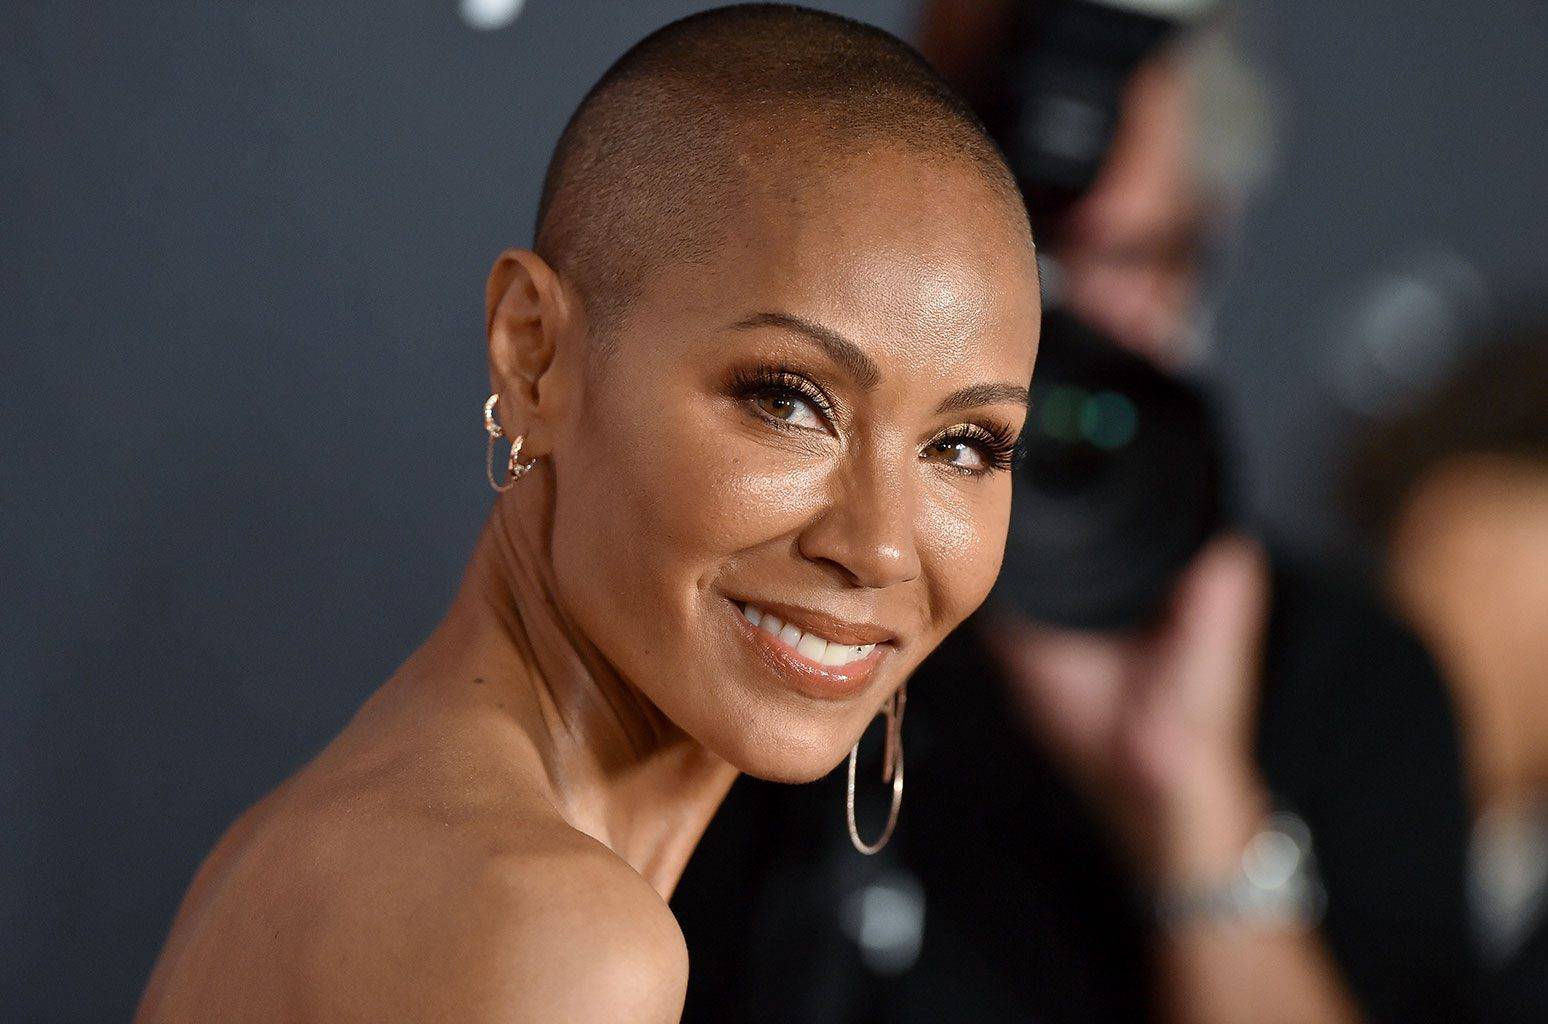 What Hair Loss Does Jada Pinkett Smith Have